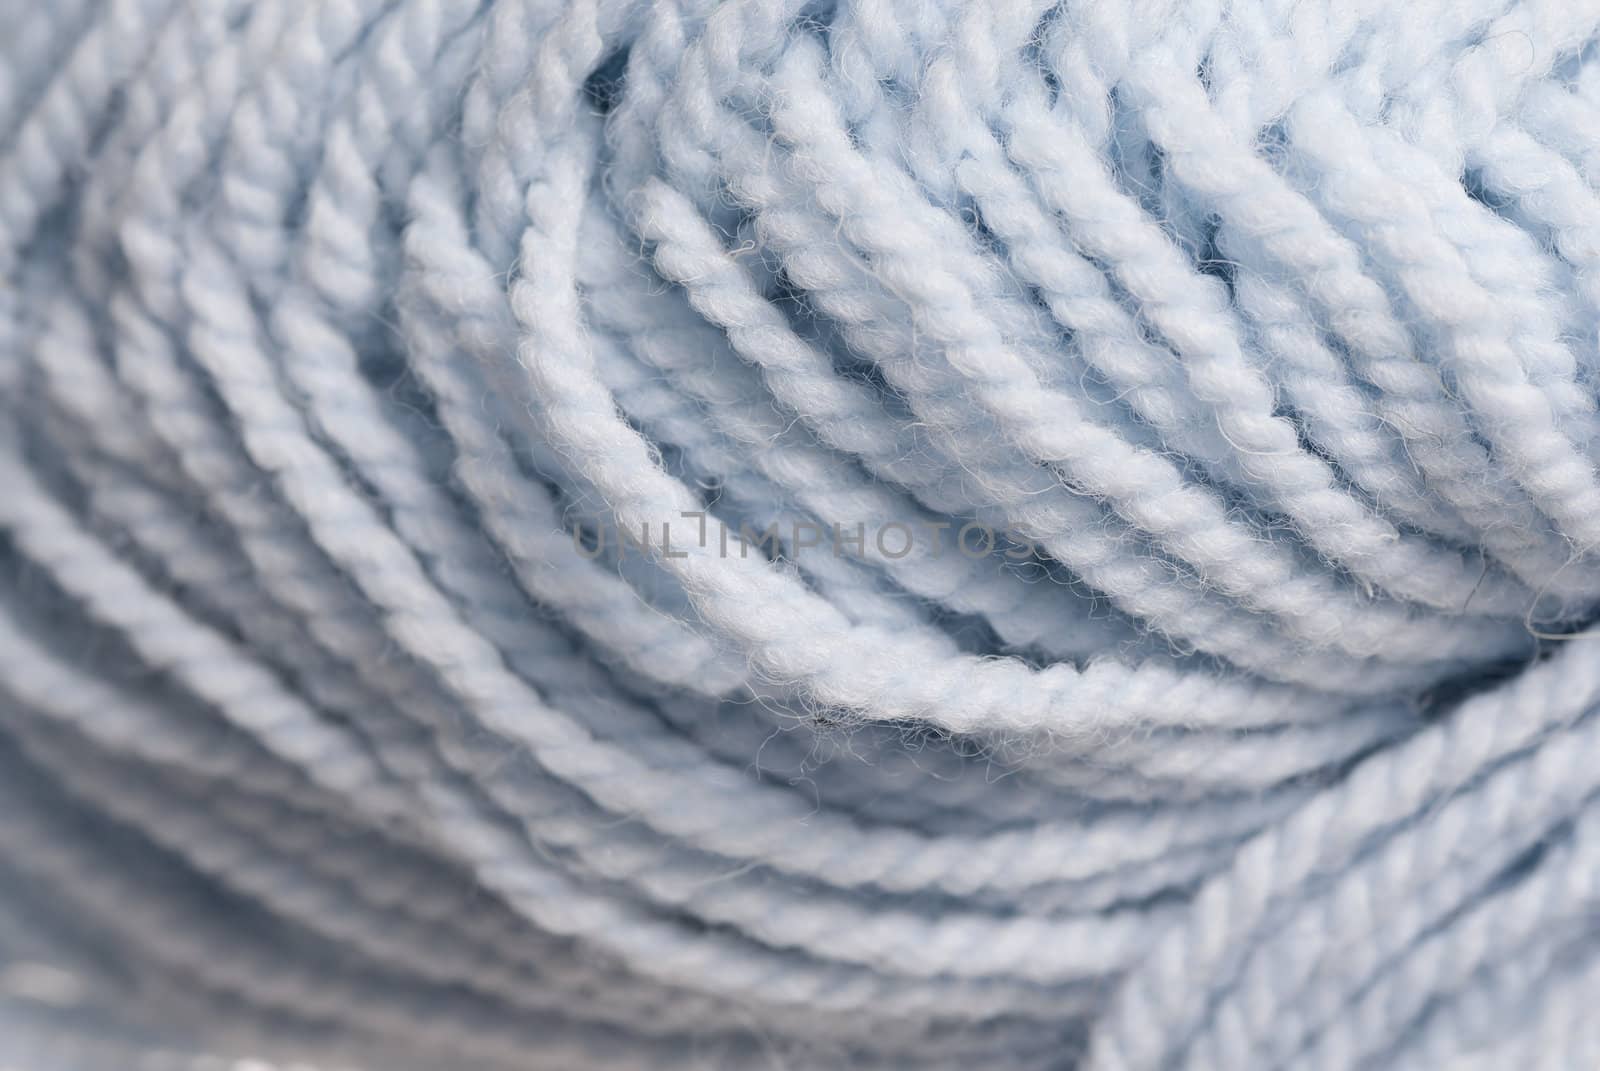 Macro Photo of Blue Wool. by swellphotography